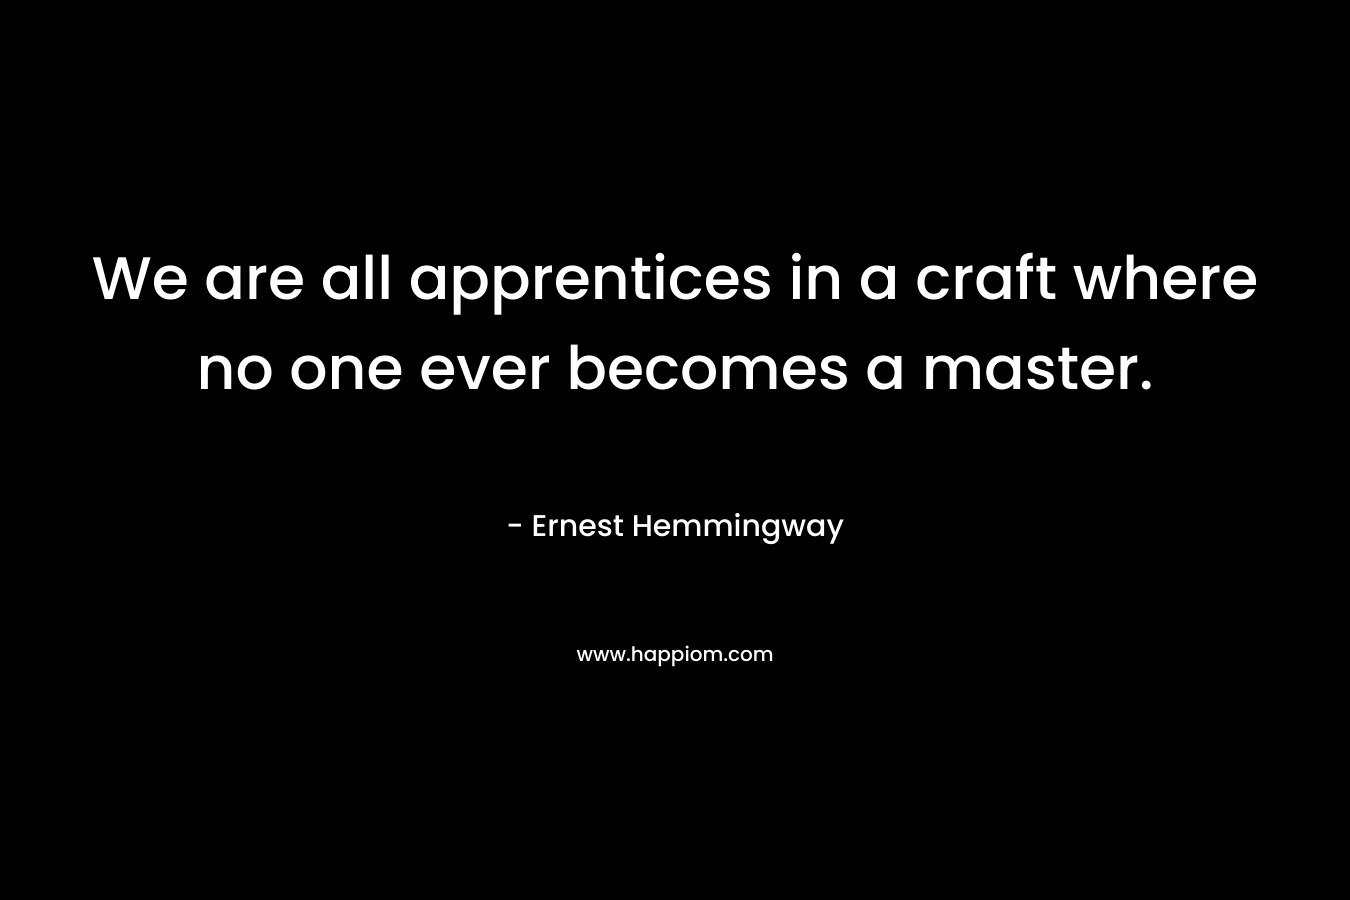 We are all apprentices in a craft where no one ever becomes a master. – Ernest Hemmingway